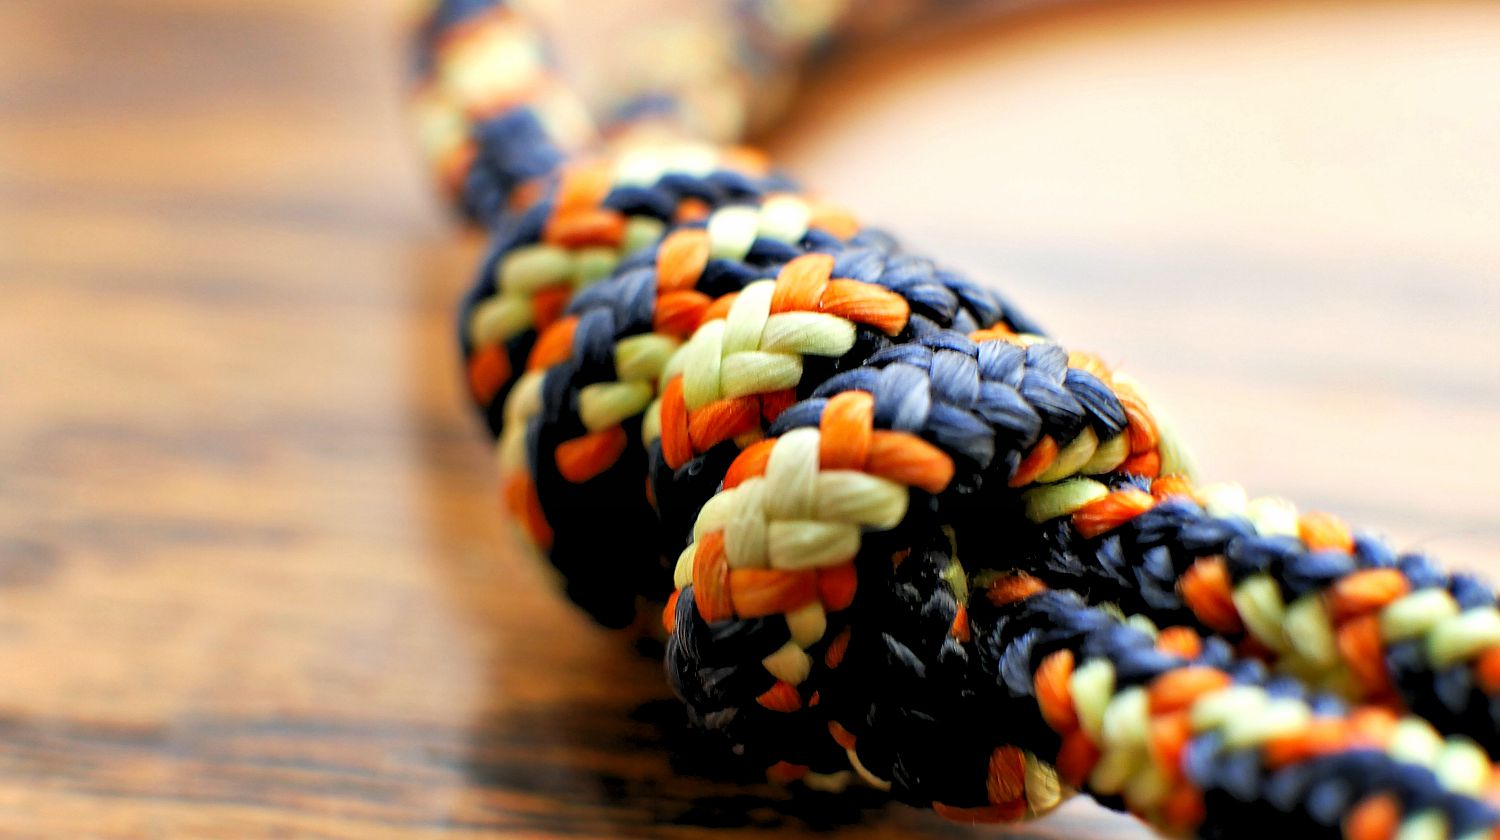 Best Knots For Camping And Survival | Survival Life